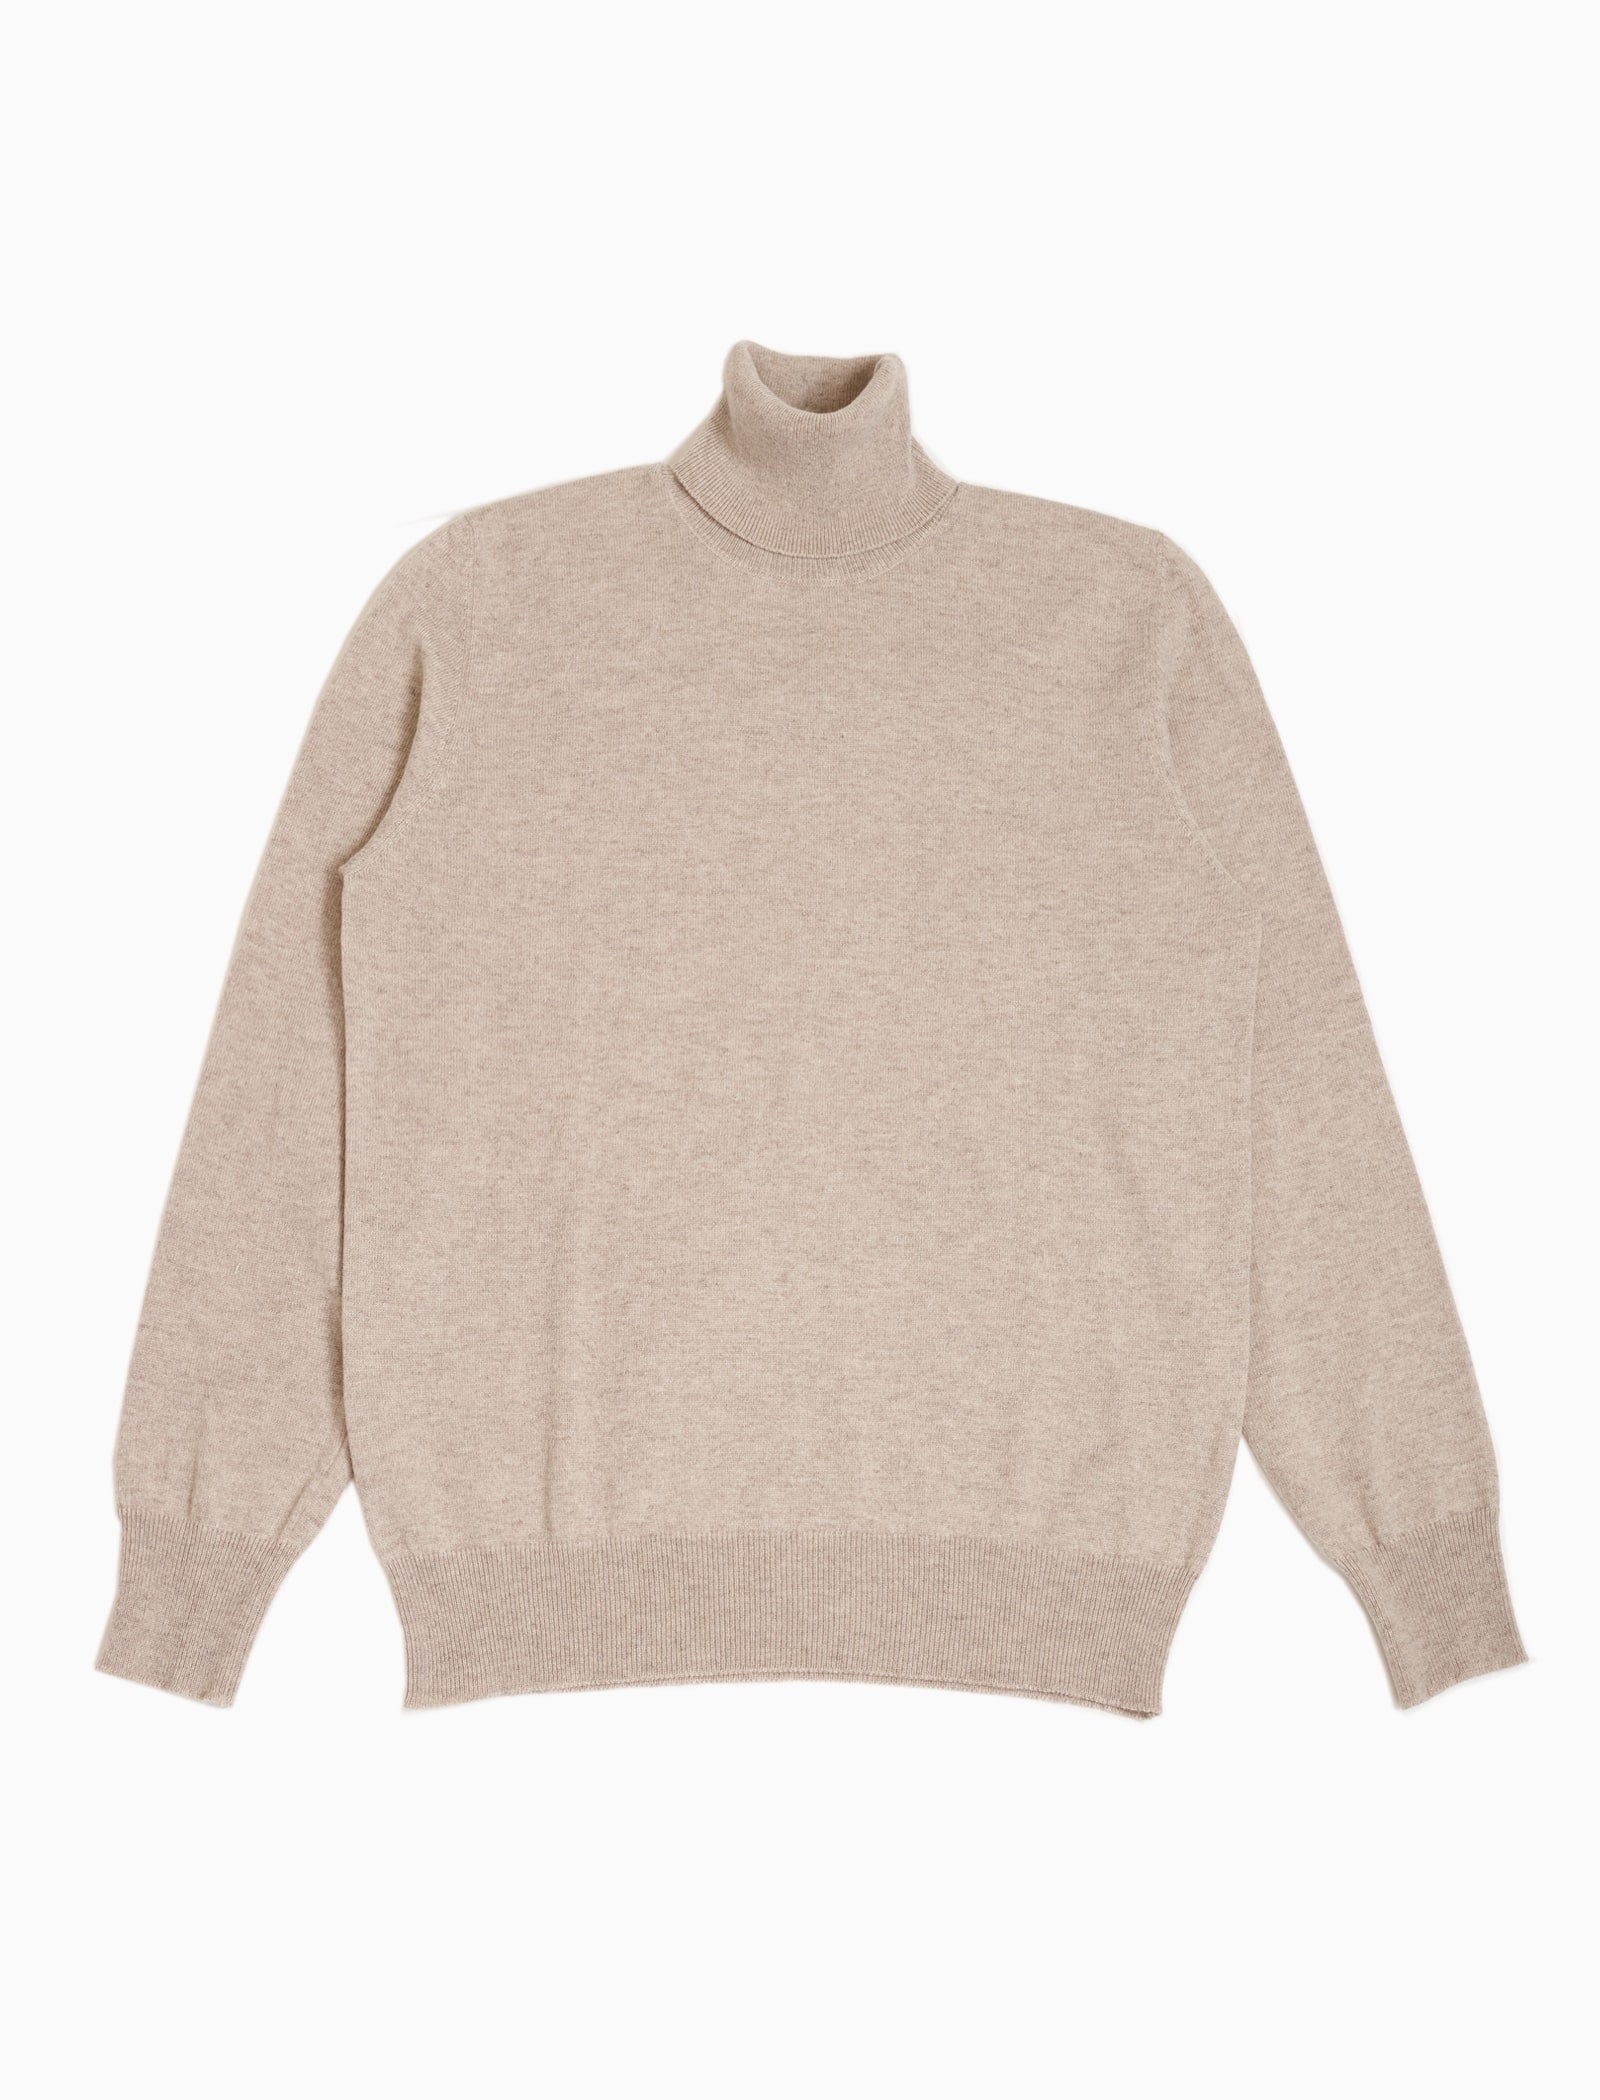 Men's Knitwear | Colourful Wool & Cashmere Jumpers - 40 Colori